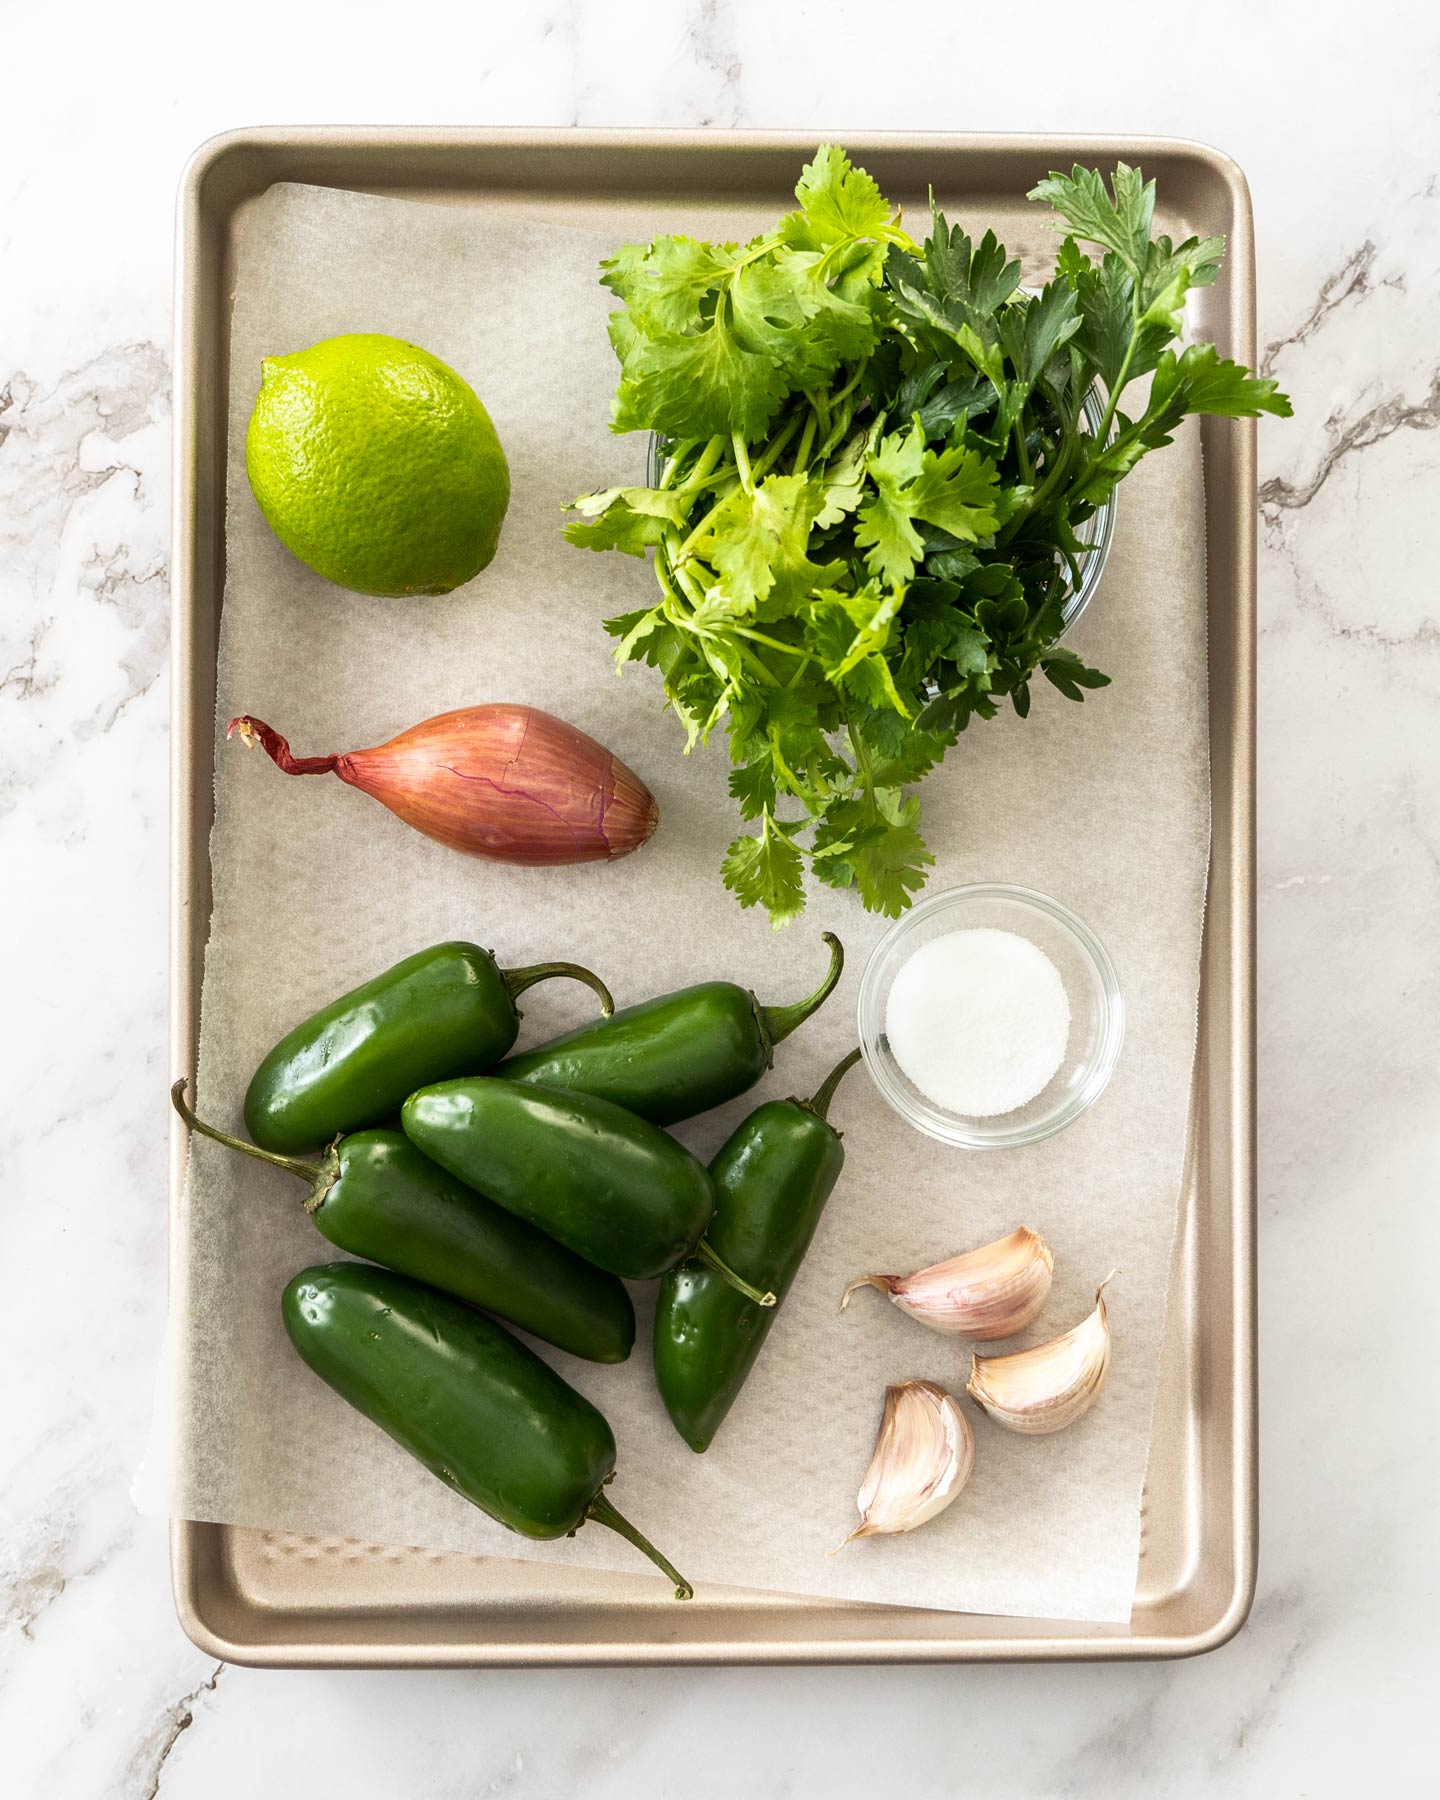 Ingredients for fresh jalapeno relish on a baking tray.